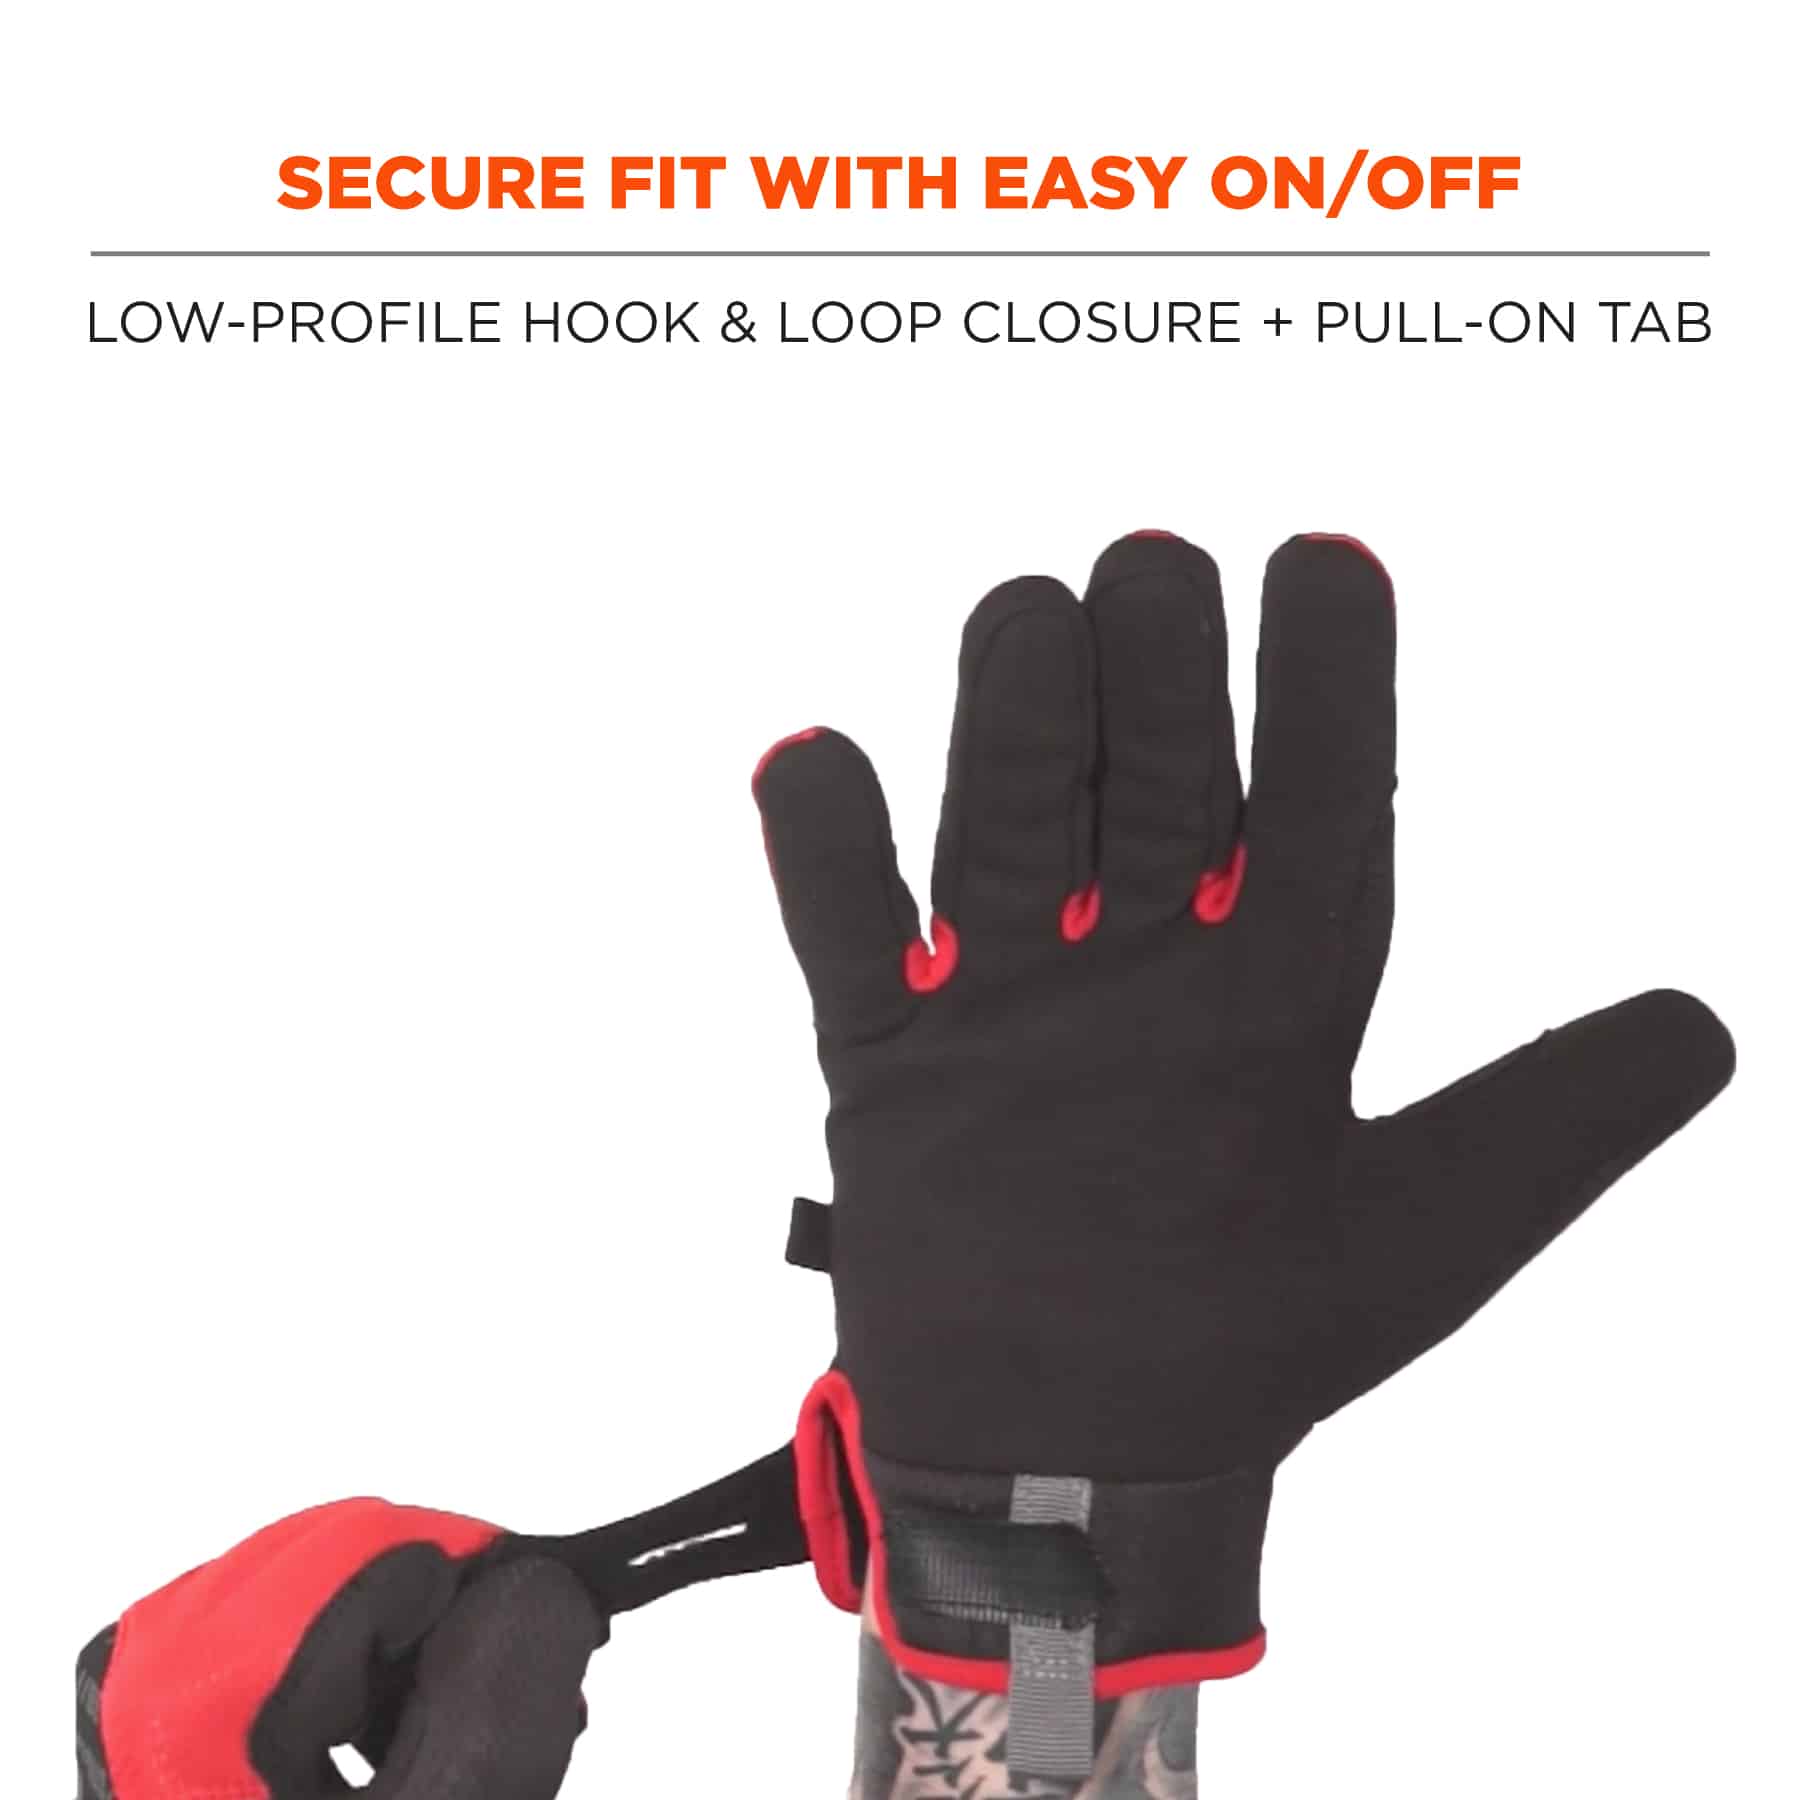 https://www.ergodyne.com/sites/default/files/product-images/17922-812cr6-utility-cut-resistance-gloves-secure-fit-with-easy-on-off.jpg